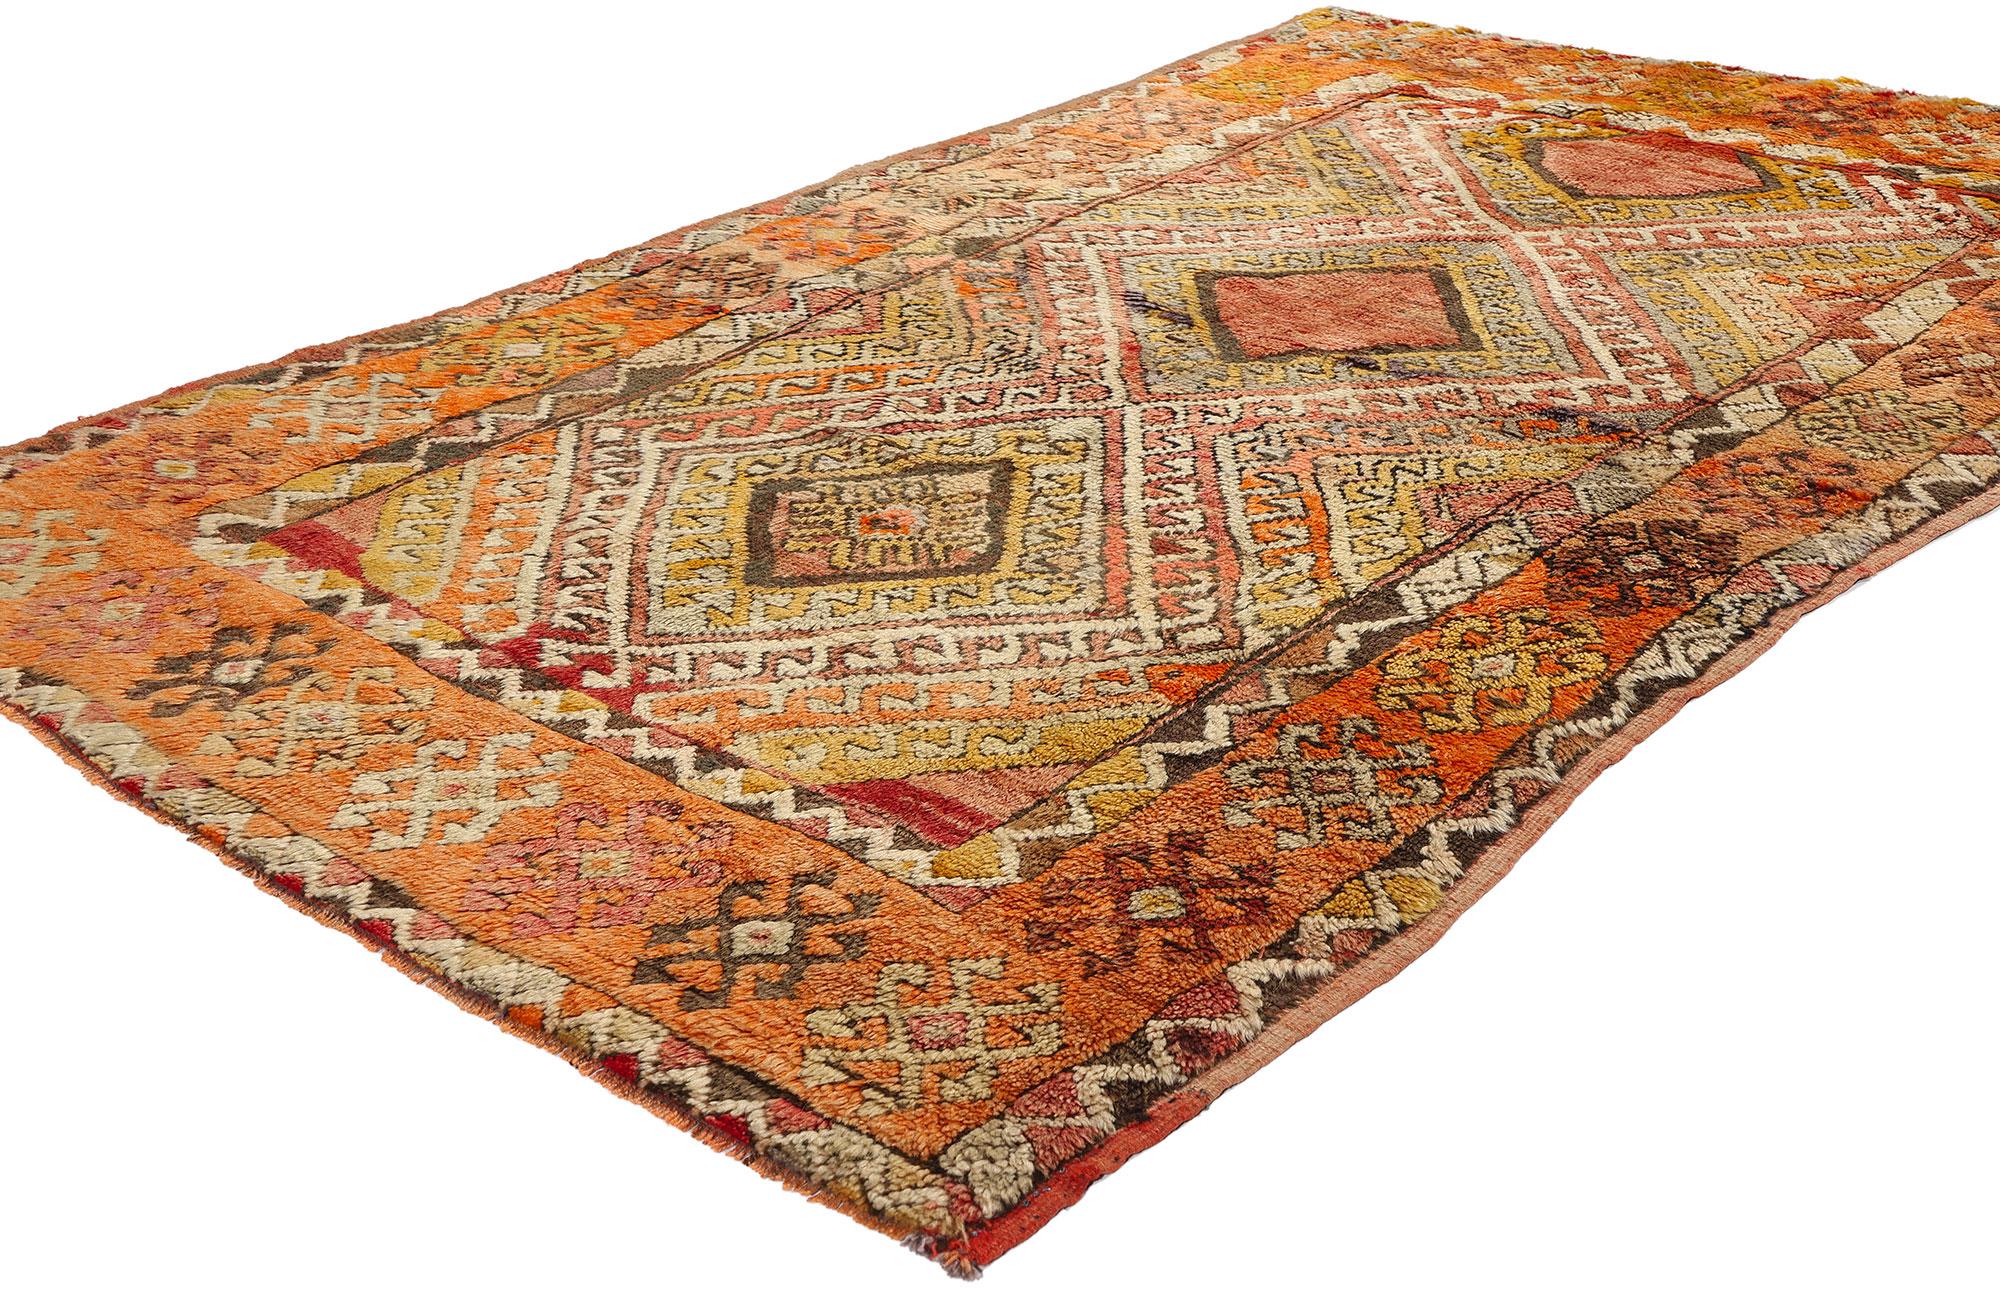 52300 Vintage Turkish Oushak Rug, 04'01 x 07'00. Turkish tribal Oushak rugs with latch hook lozenge medallions originate from the historic rug-making center of Oushak in western Turkey and are renowned for their distinctive designs and vibrant